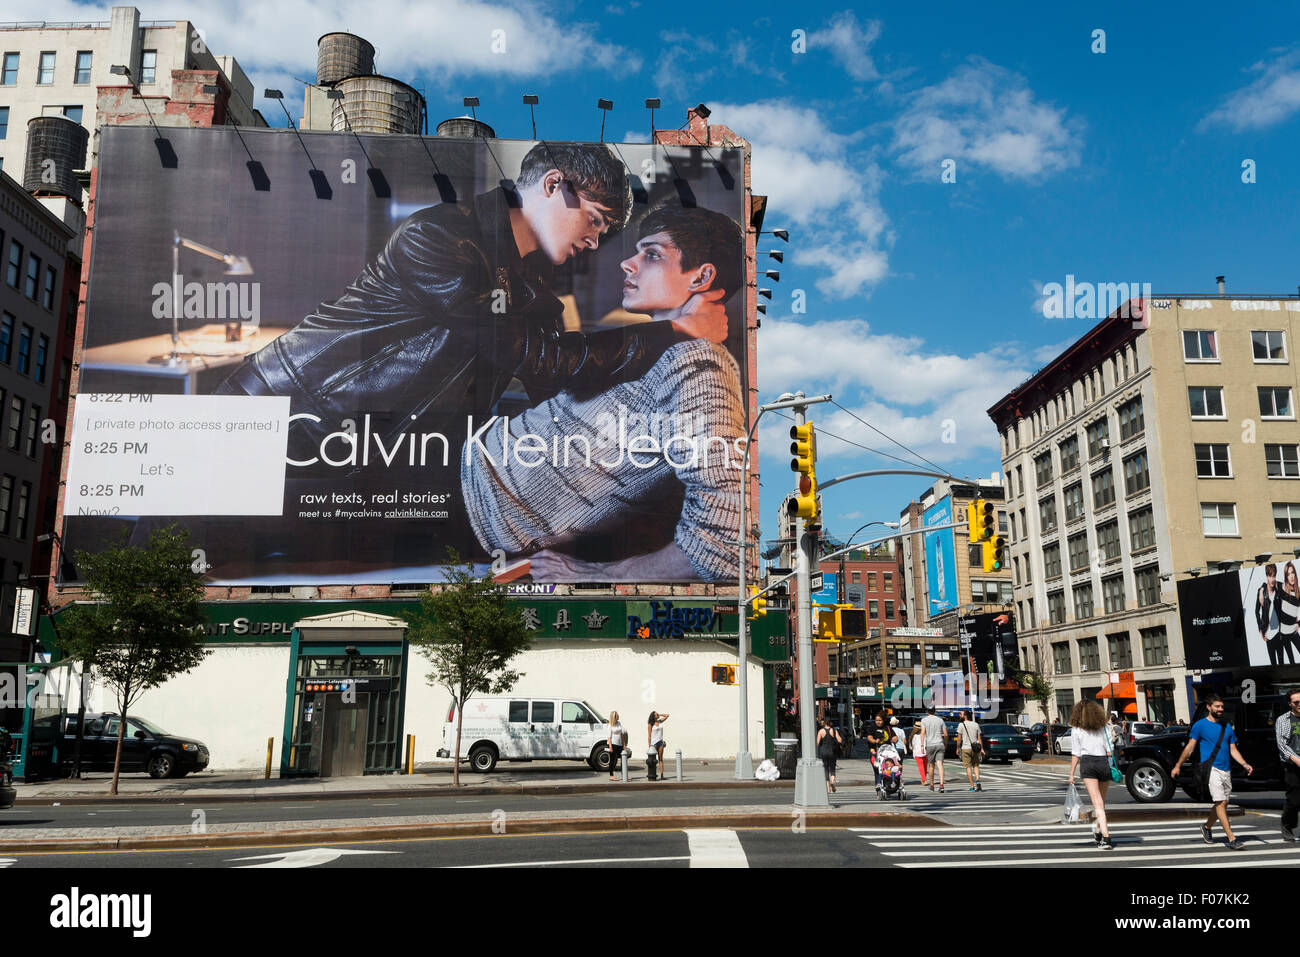 New York, NY - Billboard advertisement for Calvin Klein's new Raw campaign  featuring a gay couple, in the Noho neighborhood of Manhattan ©Stacy Walsh  Rosenstock/Alamy Stock Photo - Alamy